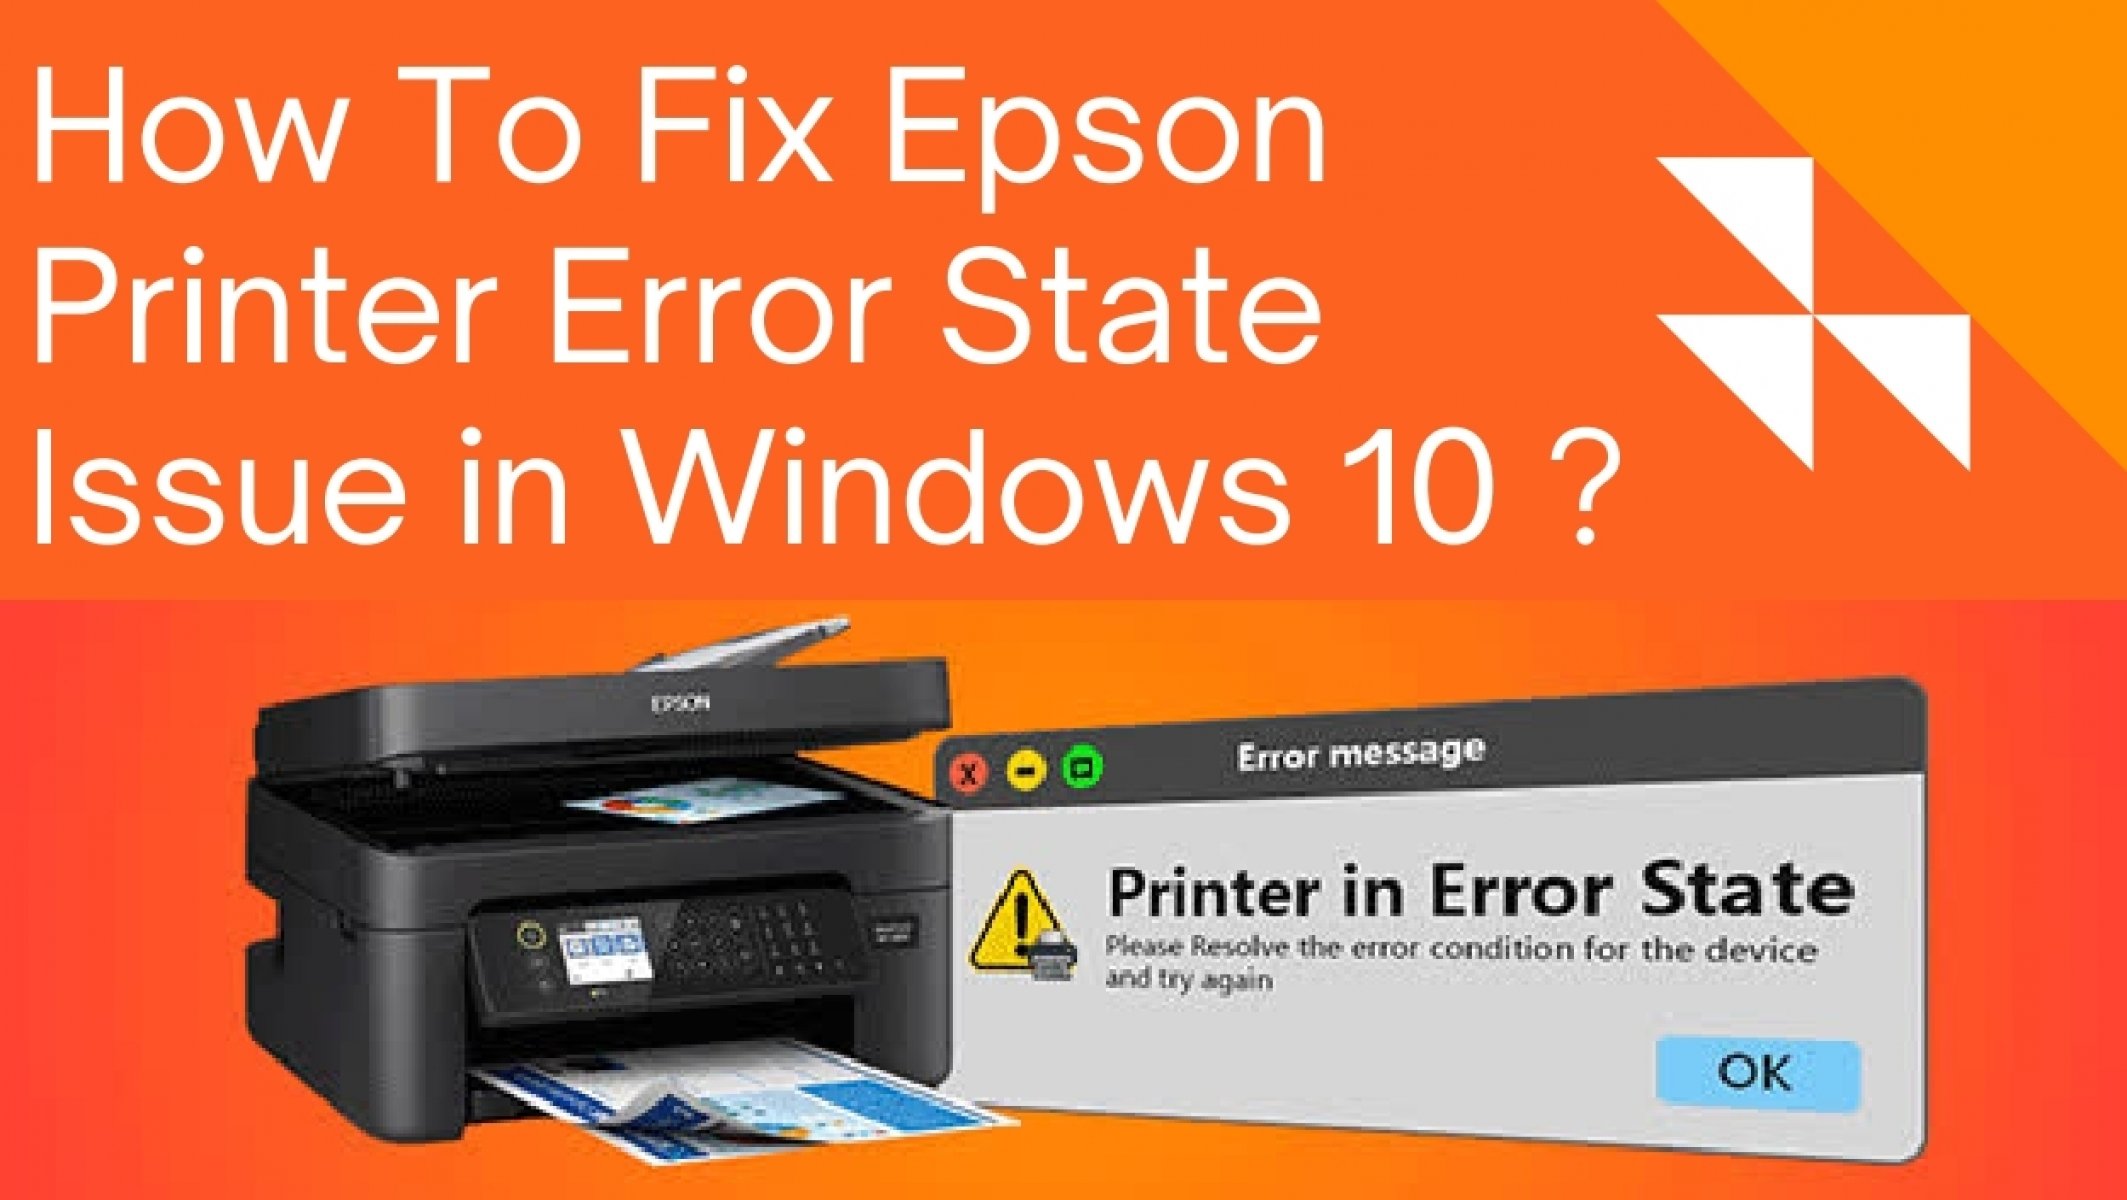 How To Fix Epson Printer Error State Issue In Windows 10 1437